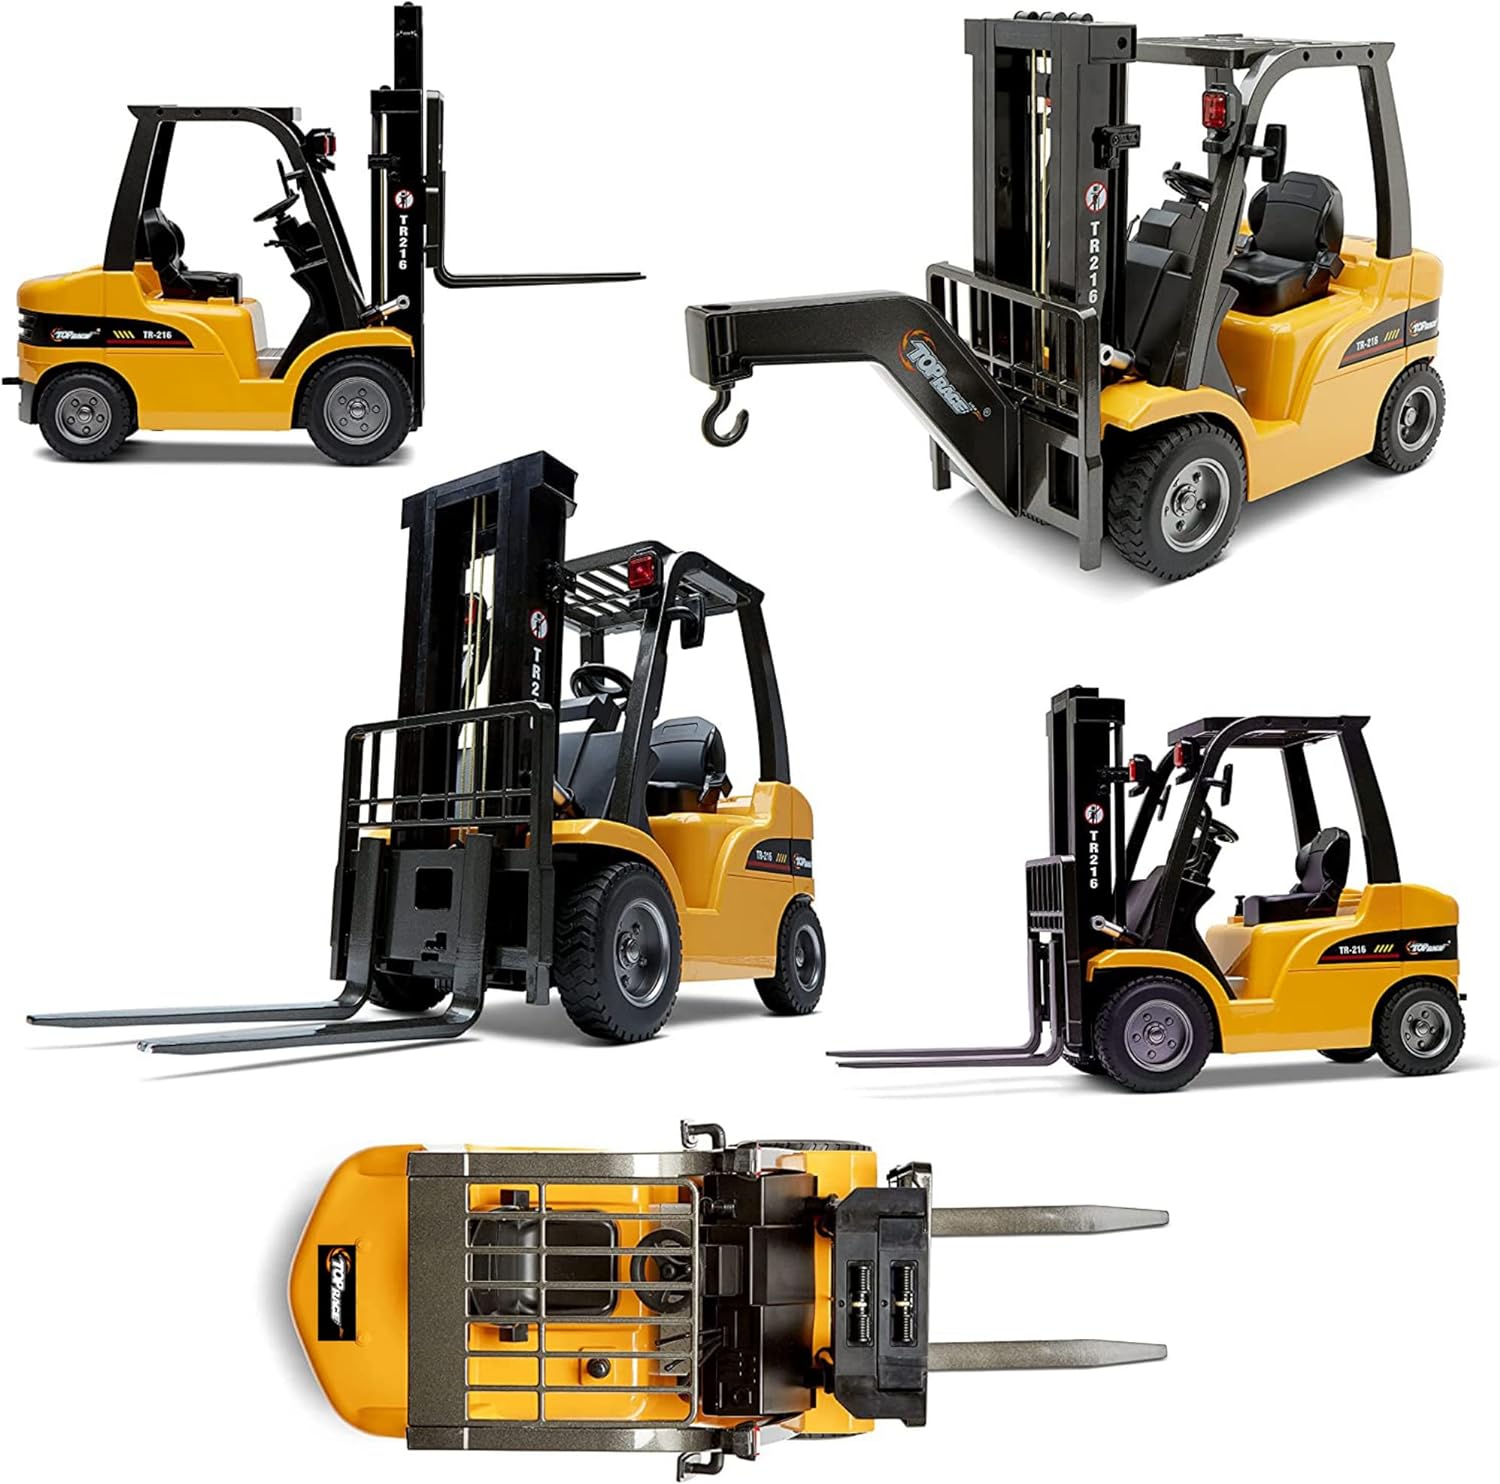 Top Race Jumbo Remote Control Forklift TR-216: A Powerful and Realistic RC Construction Toy